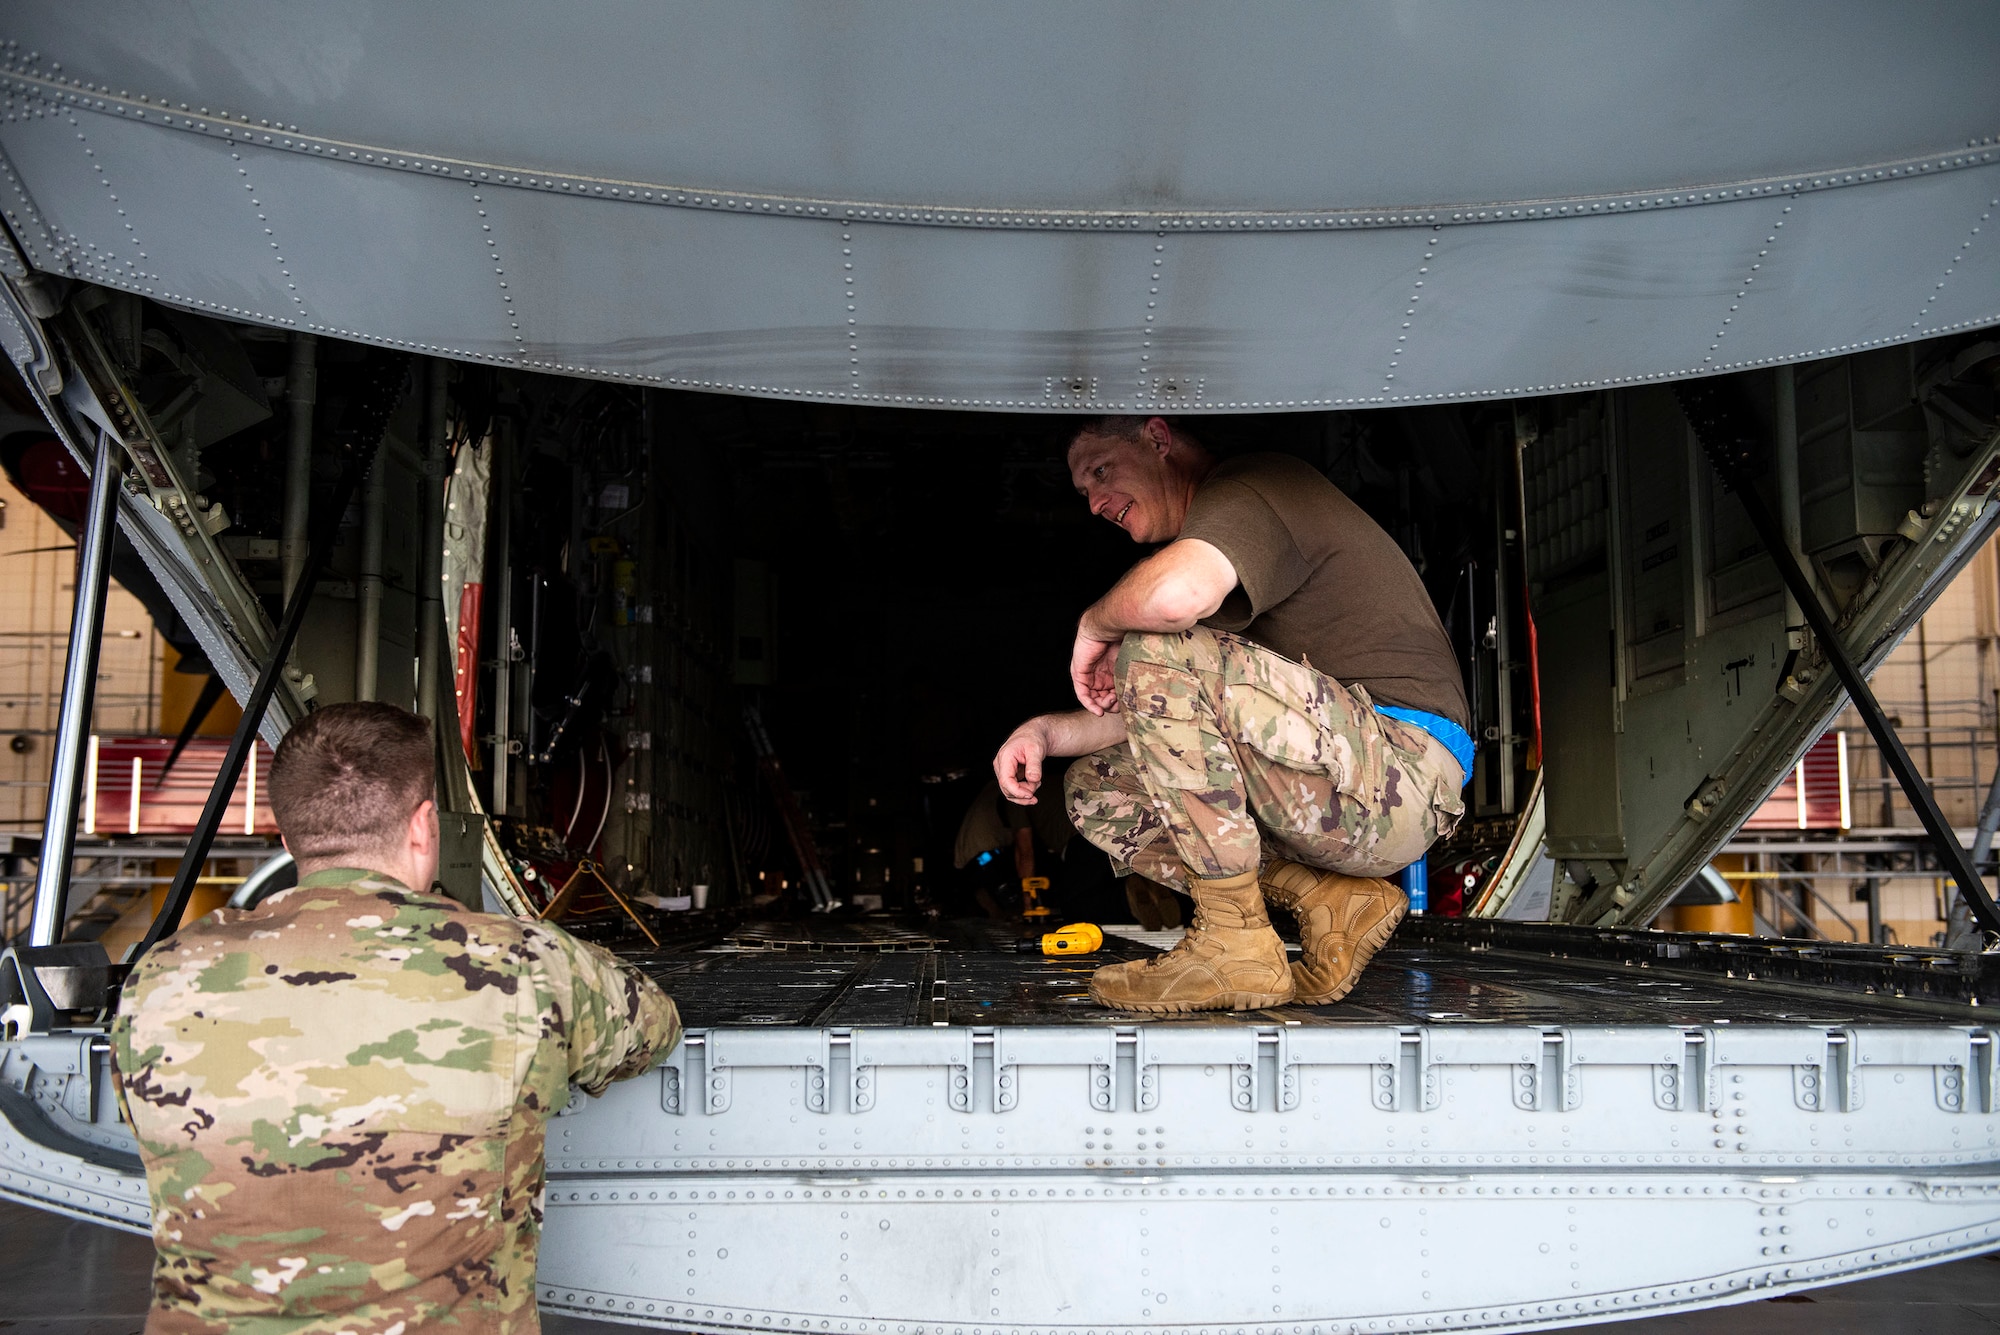 Tech. Sgt. Phillip Horton, right, 71st Aircraft Maintenance Unit (AMU) crew chief, speaks with 1st Lt. Derek Mundell, 71st AMU assistant officer in charge, during preparation of an HC-130J Combat King II for a situational awareness communication upgrade (SACU) modification Sept. 25, 2019, at Moody Air Force Base, Ga. This SACU will enhance the aircraft’s ability to communicate with personnel on the ground during search and rescue operations. (U.S. Air Force photo by Senior Airman Erick Requadt)